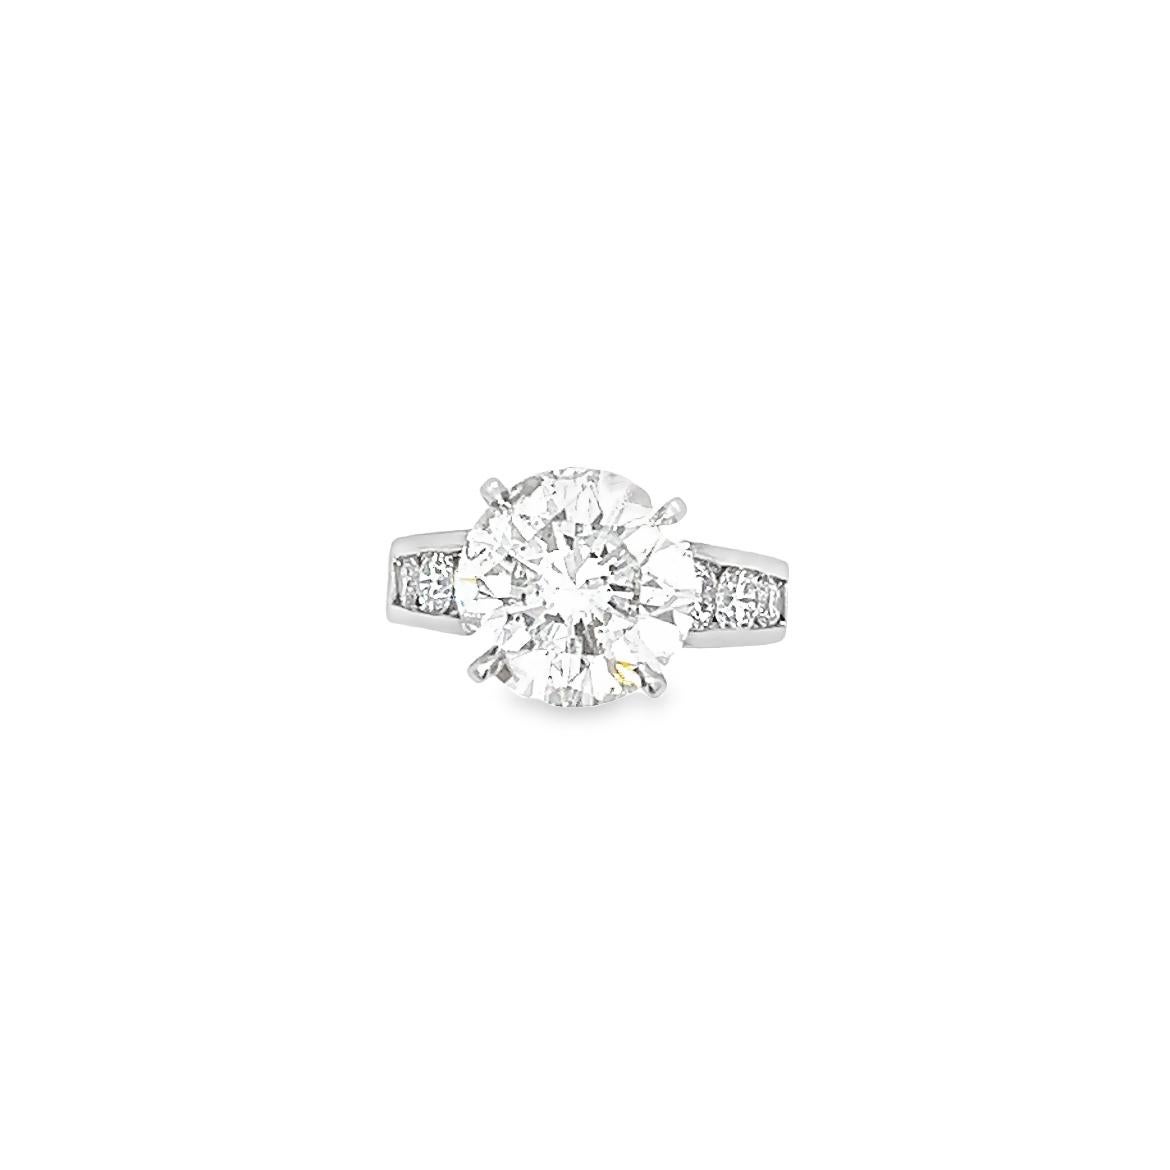 You won't find another engagement ring like this one. It boasts a breathtaking 5.92 Carat natural diamond, certified by GIA. The platinum setting is encrusted with diamonds on both sides, running halfway around the ring. This ring is guaranteed to